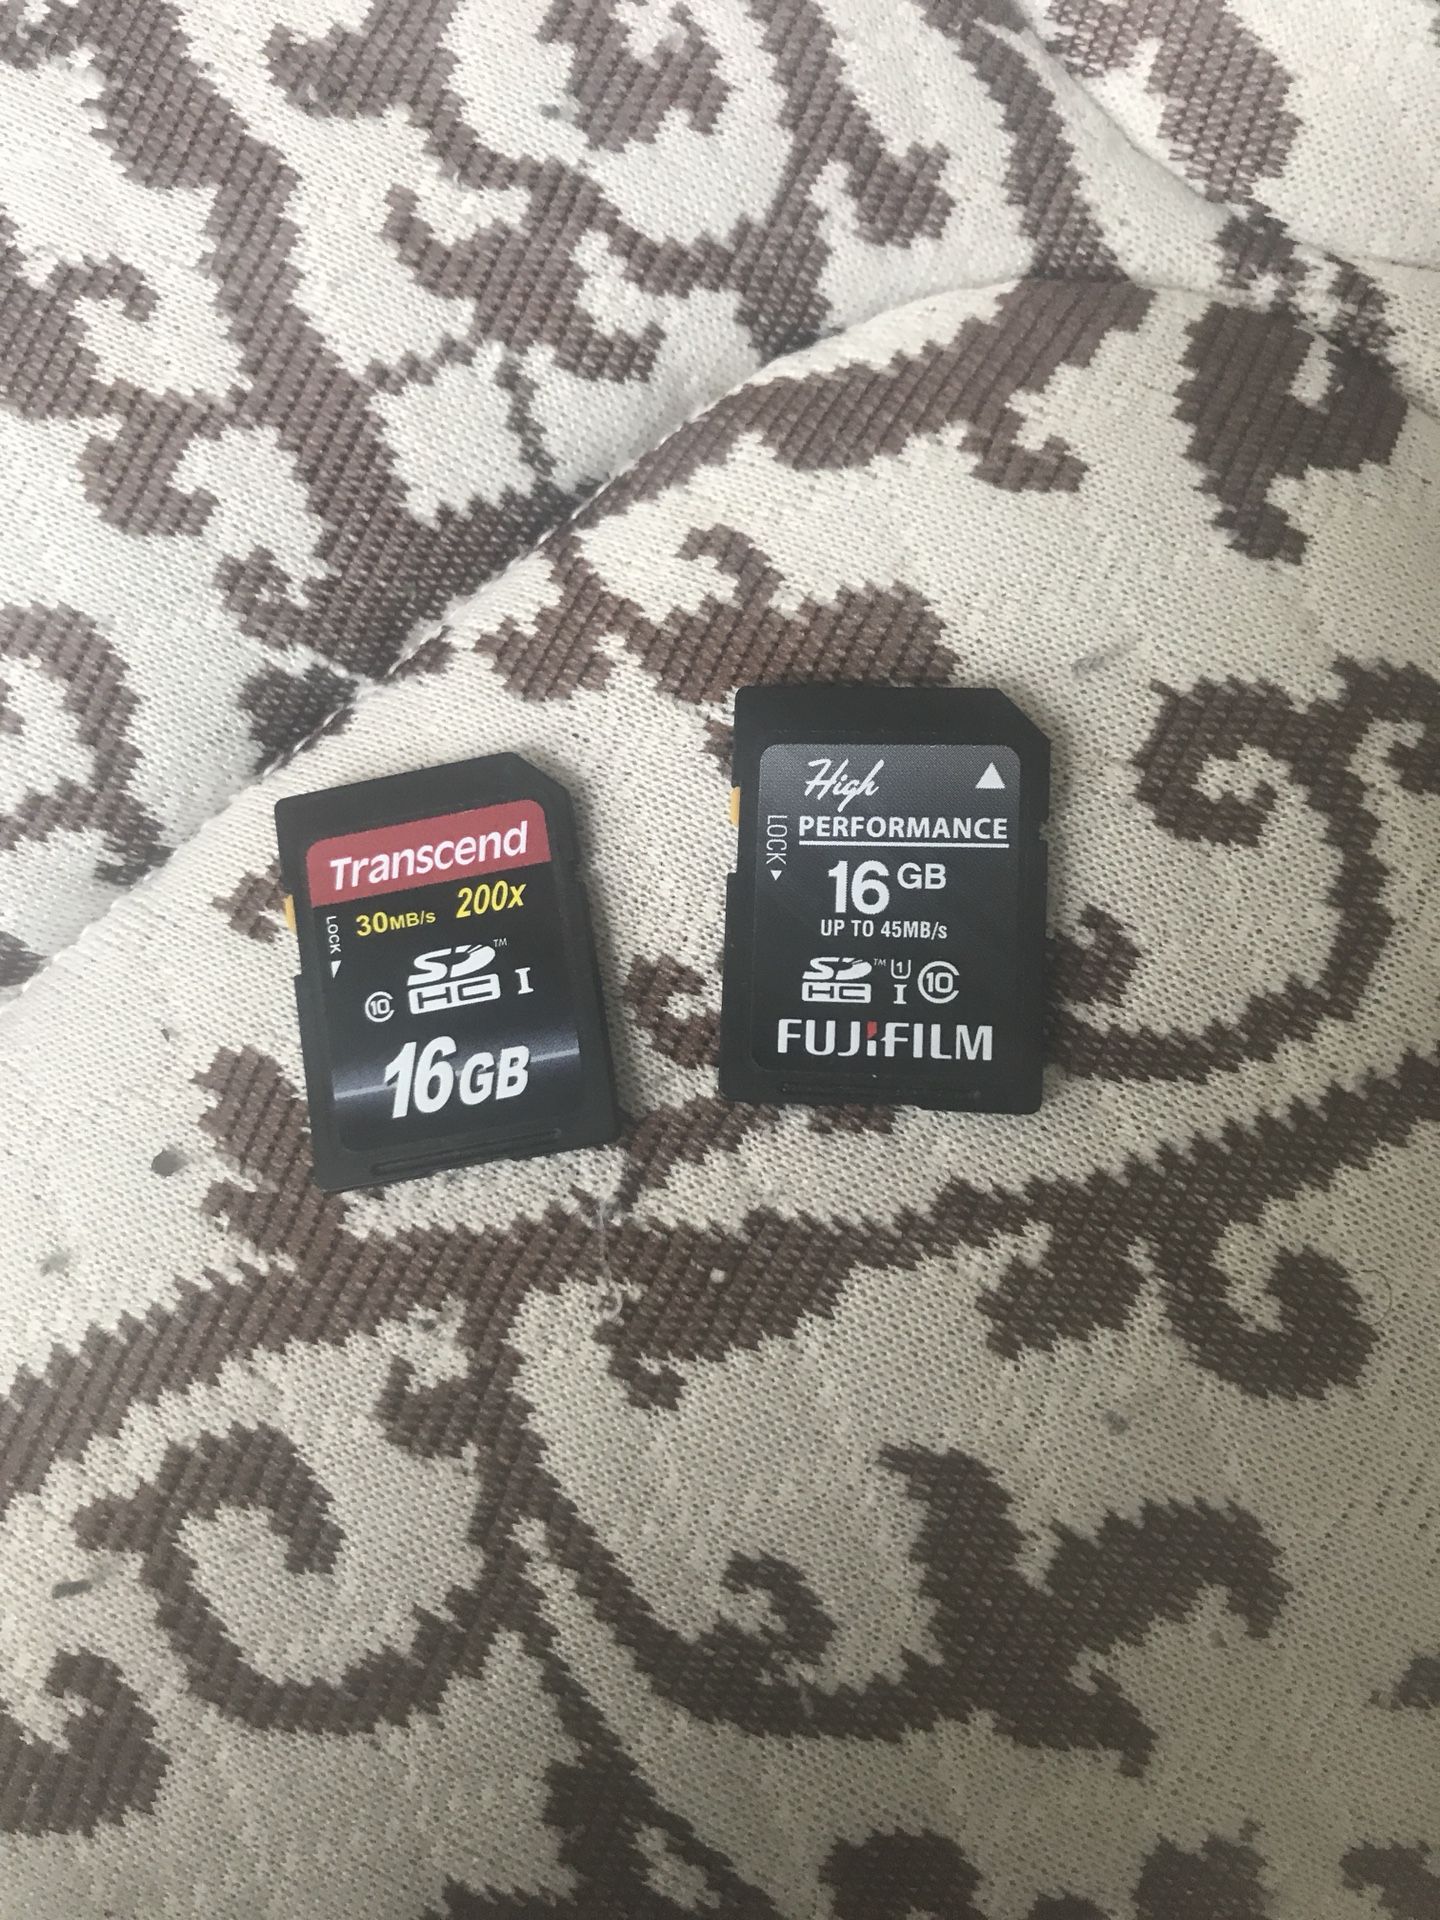 Two 16GB memory cards